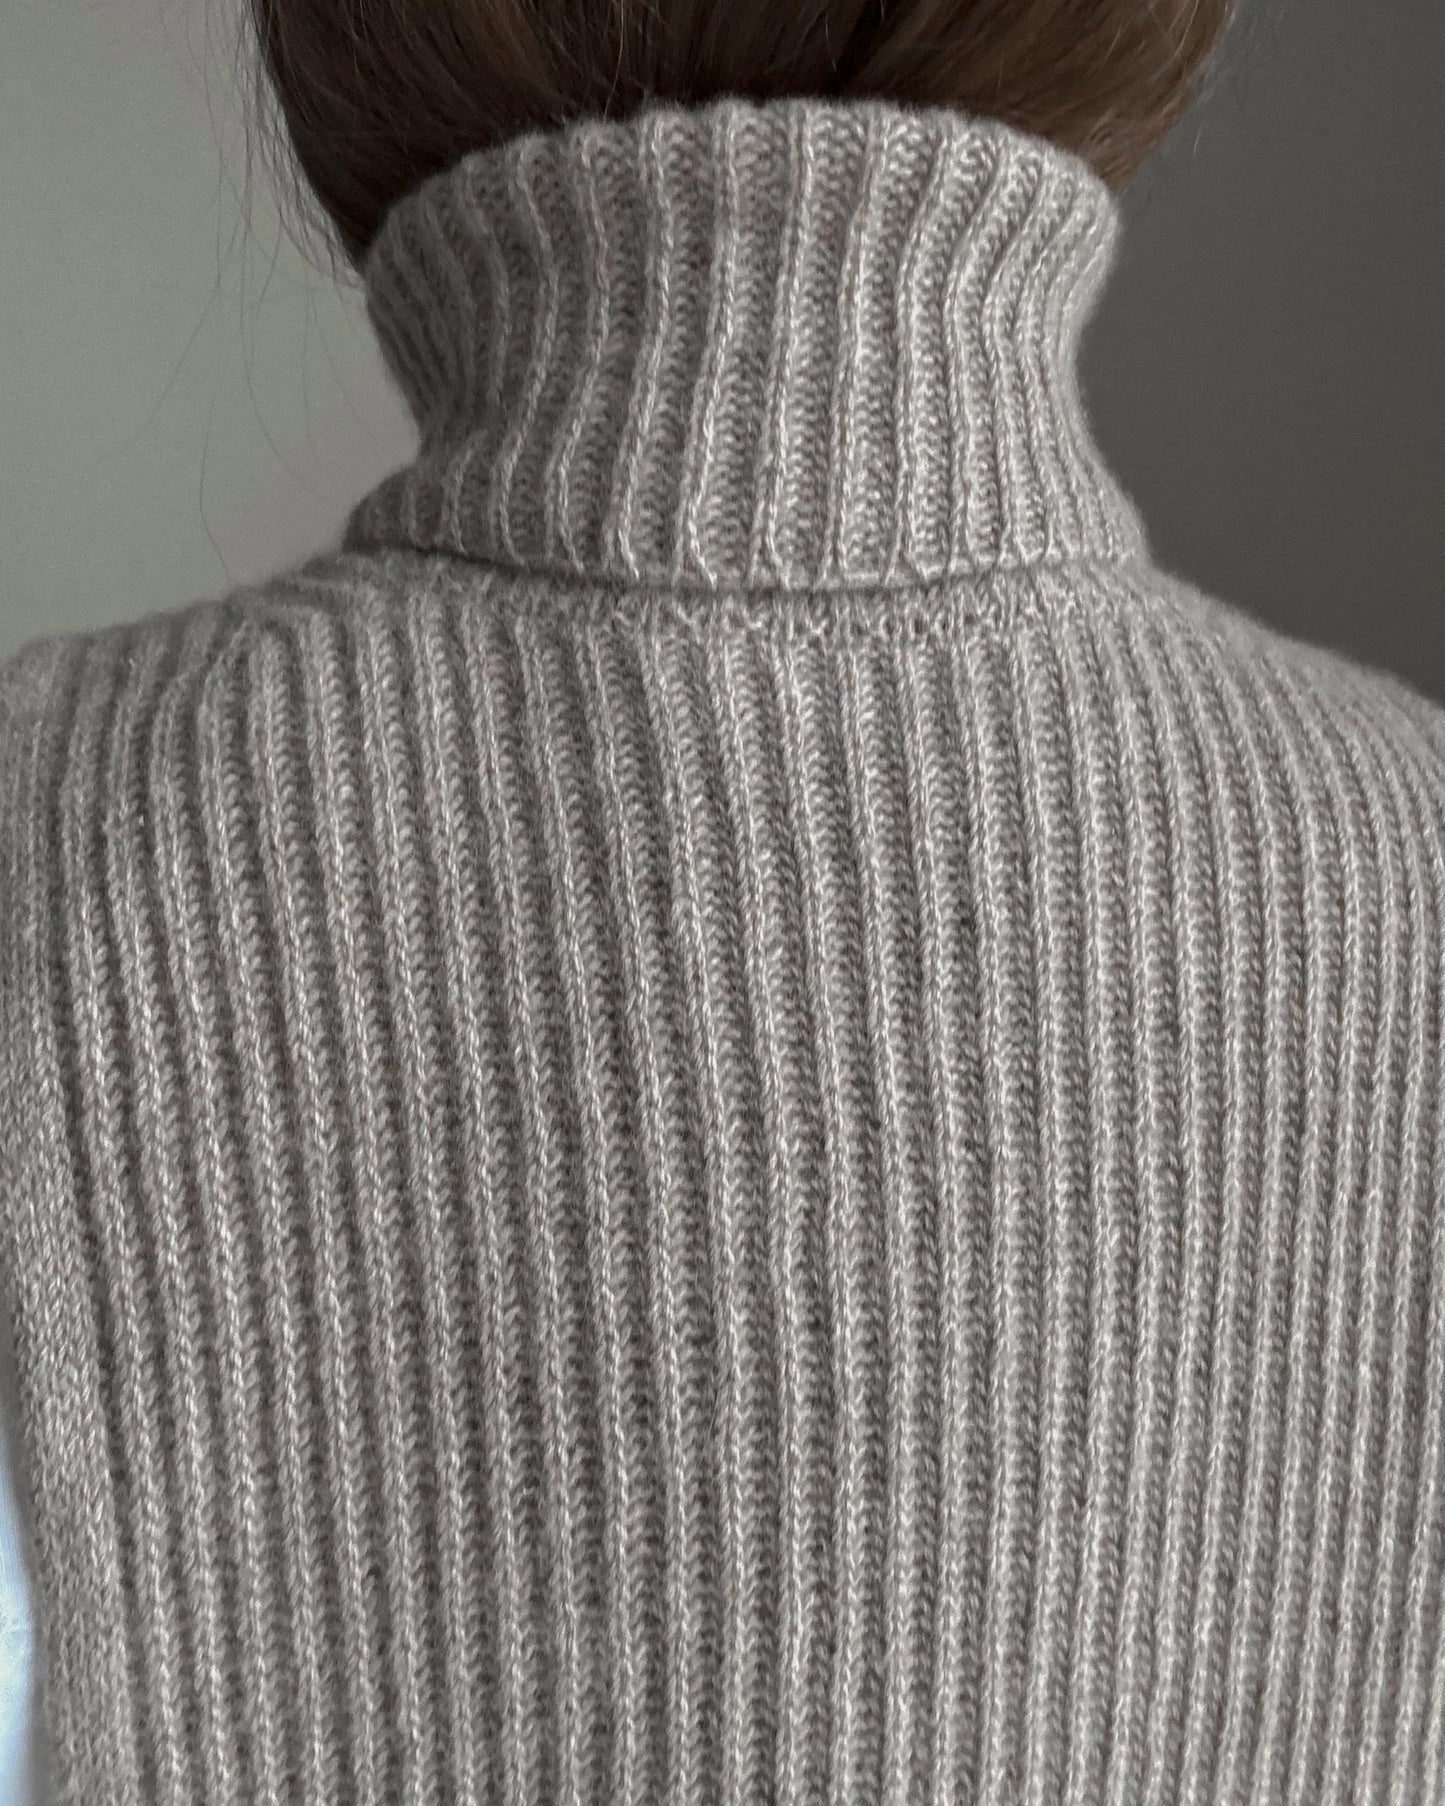 Knitted polo sweater design, Bobbi Neck Warmer pattern, elegant and warm.